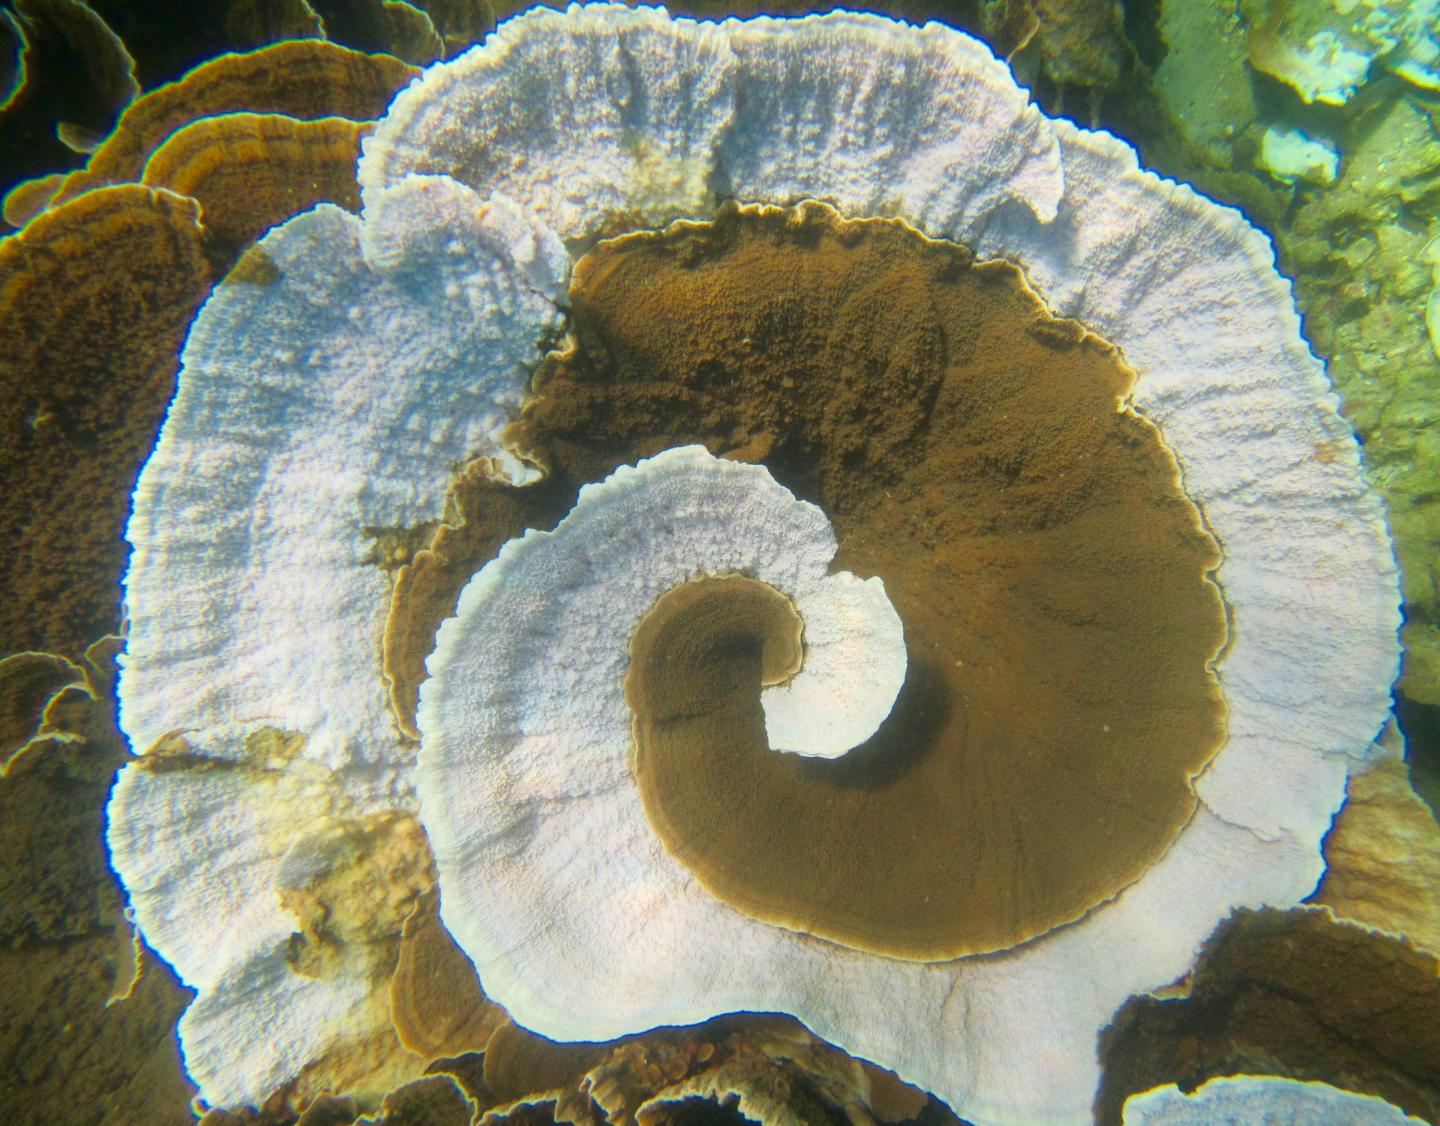 global warming, bleached coral